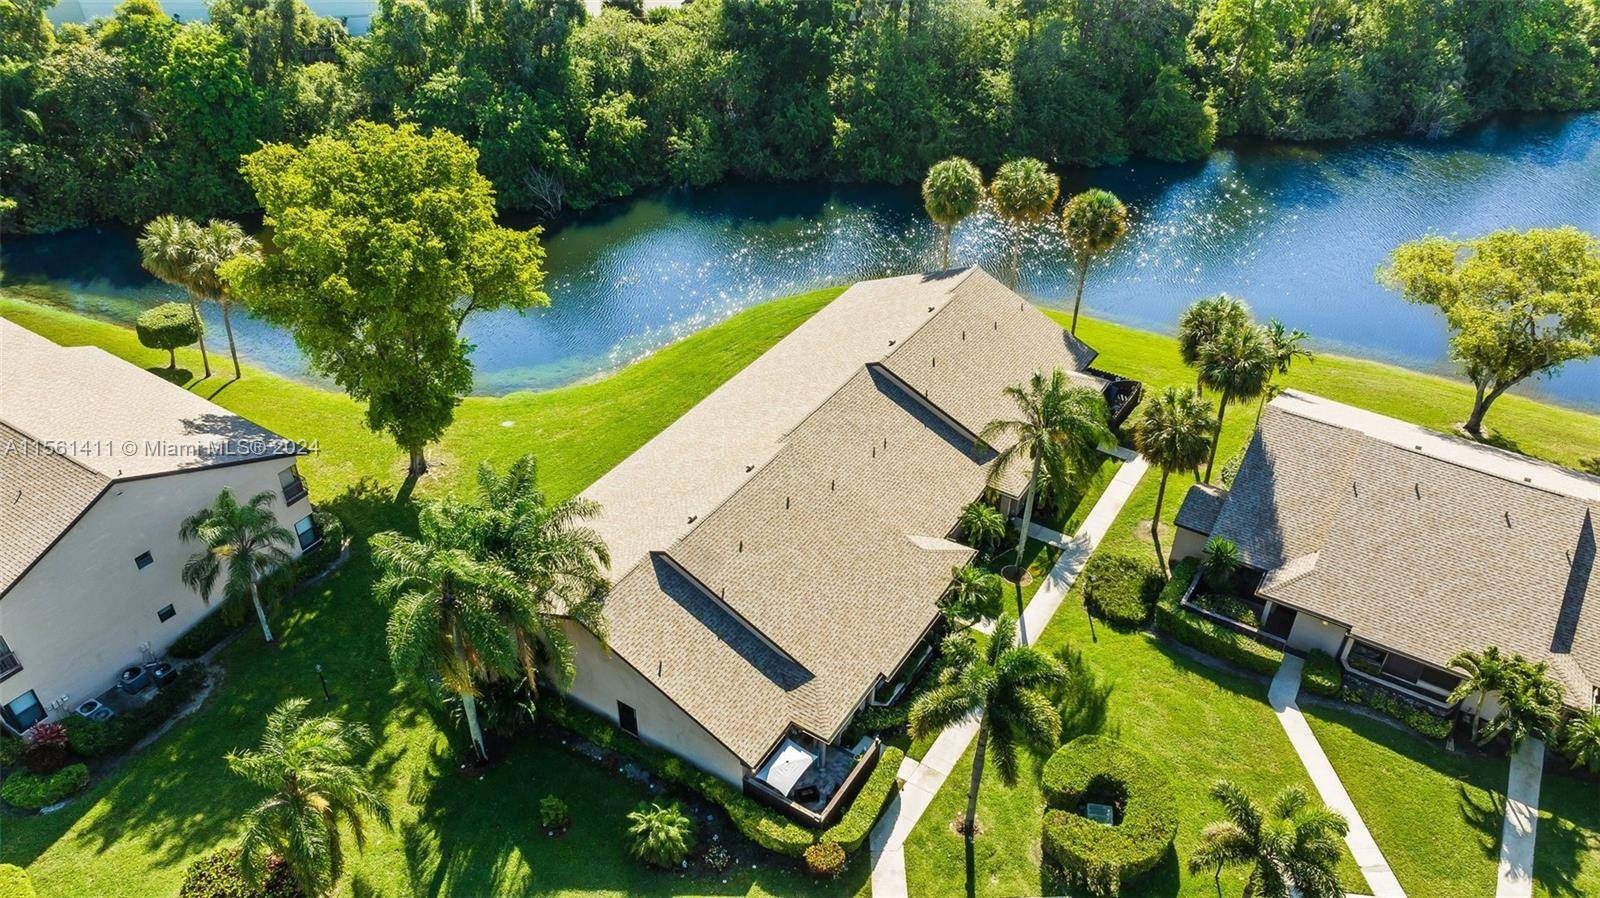 Gorgeous Upgraded 2 Bed 2 Bath Corner Villa boasting an enclosed air conditioned Florida room overlooking serene lake garden view.